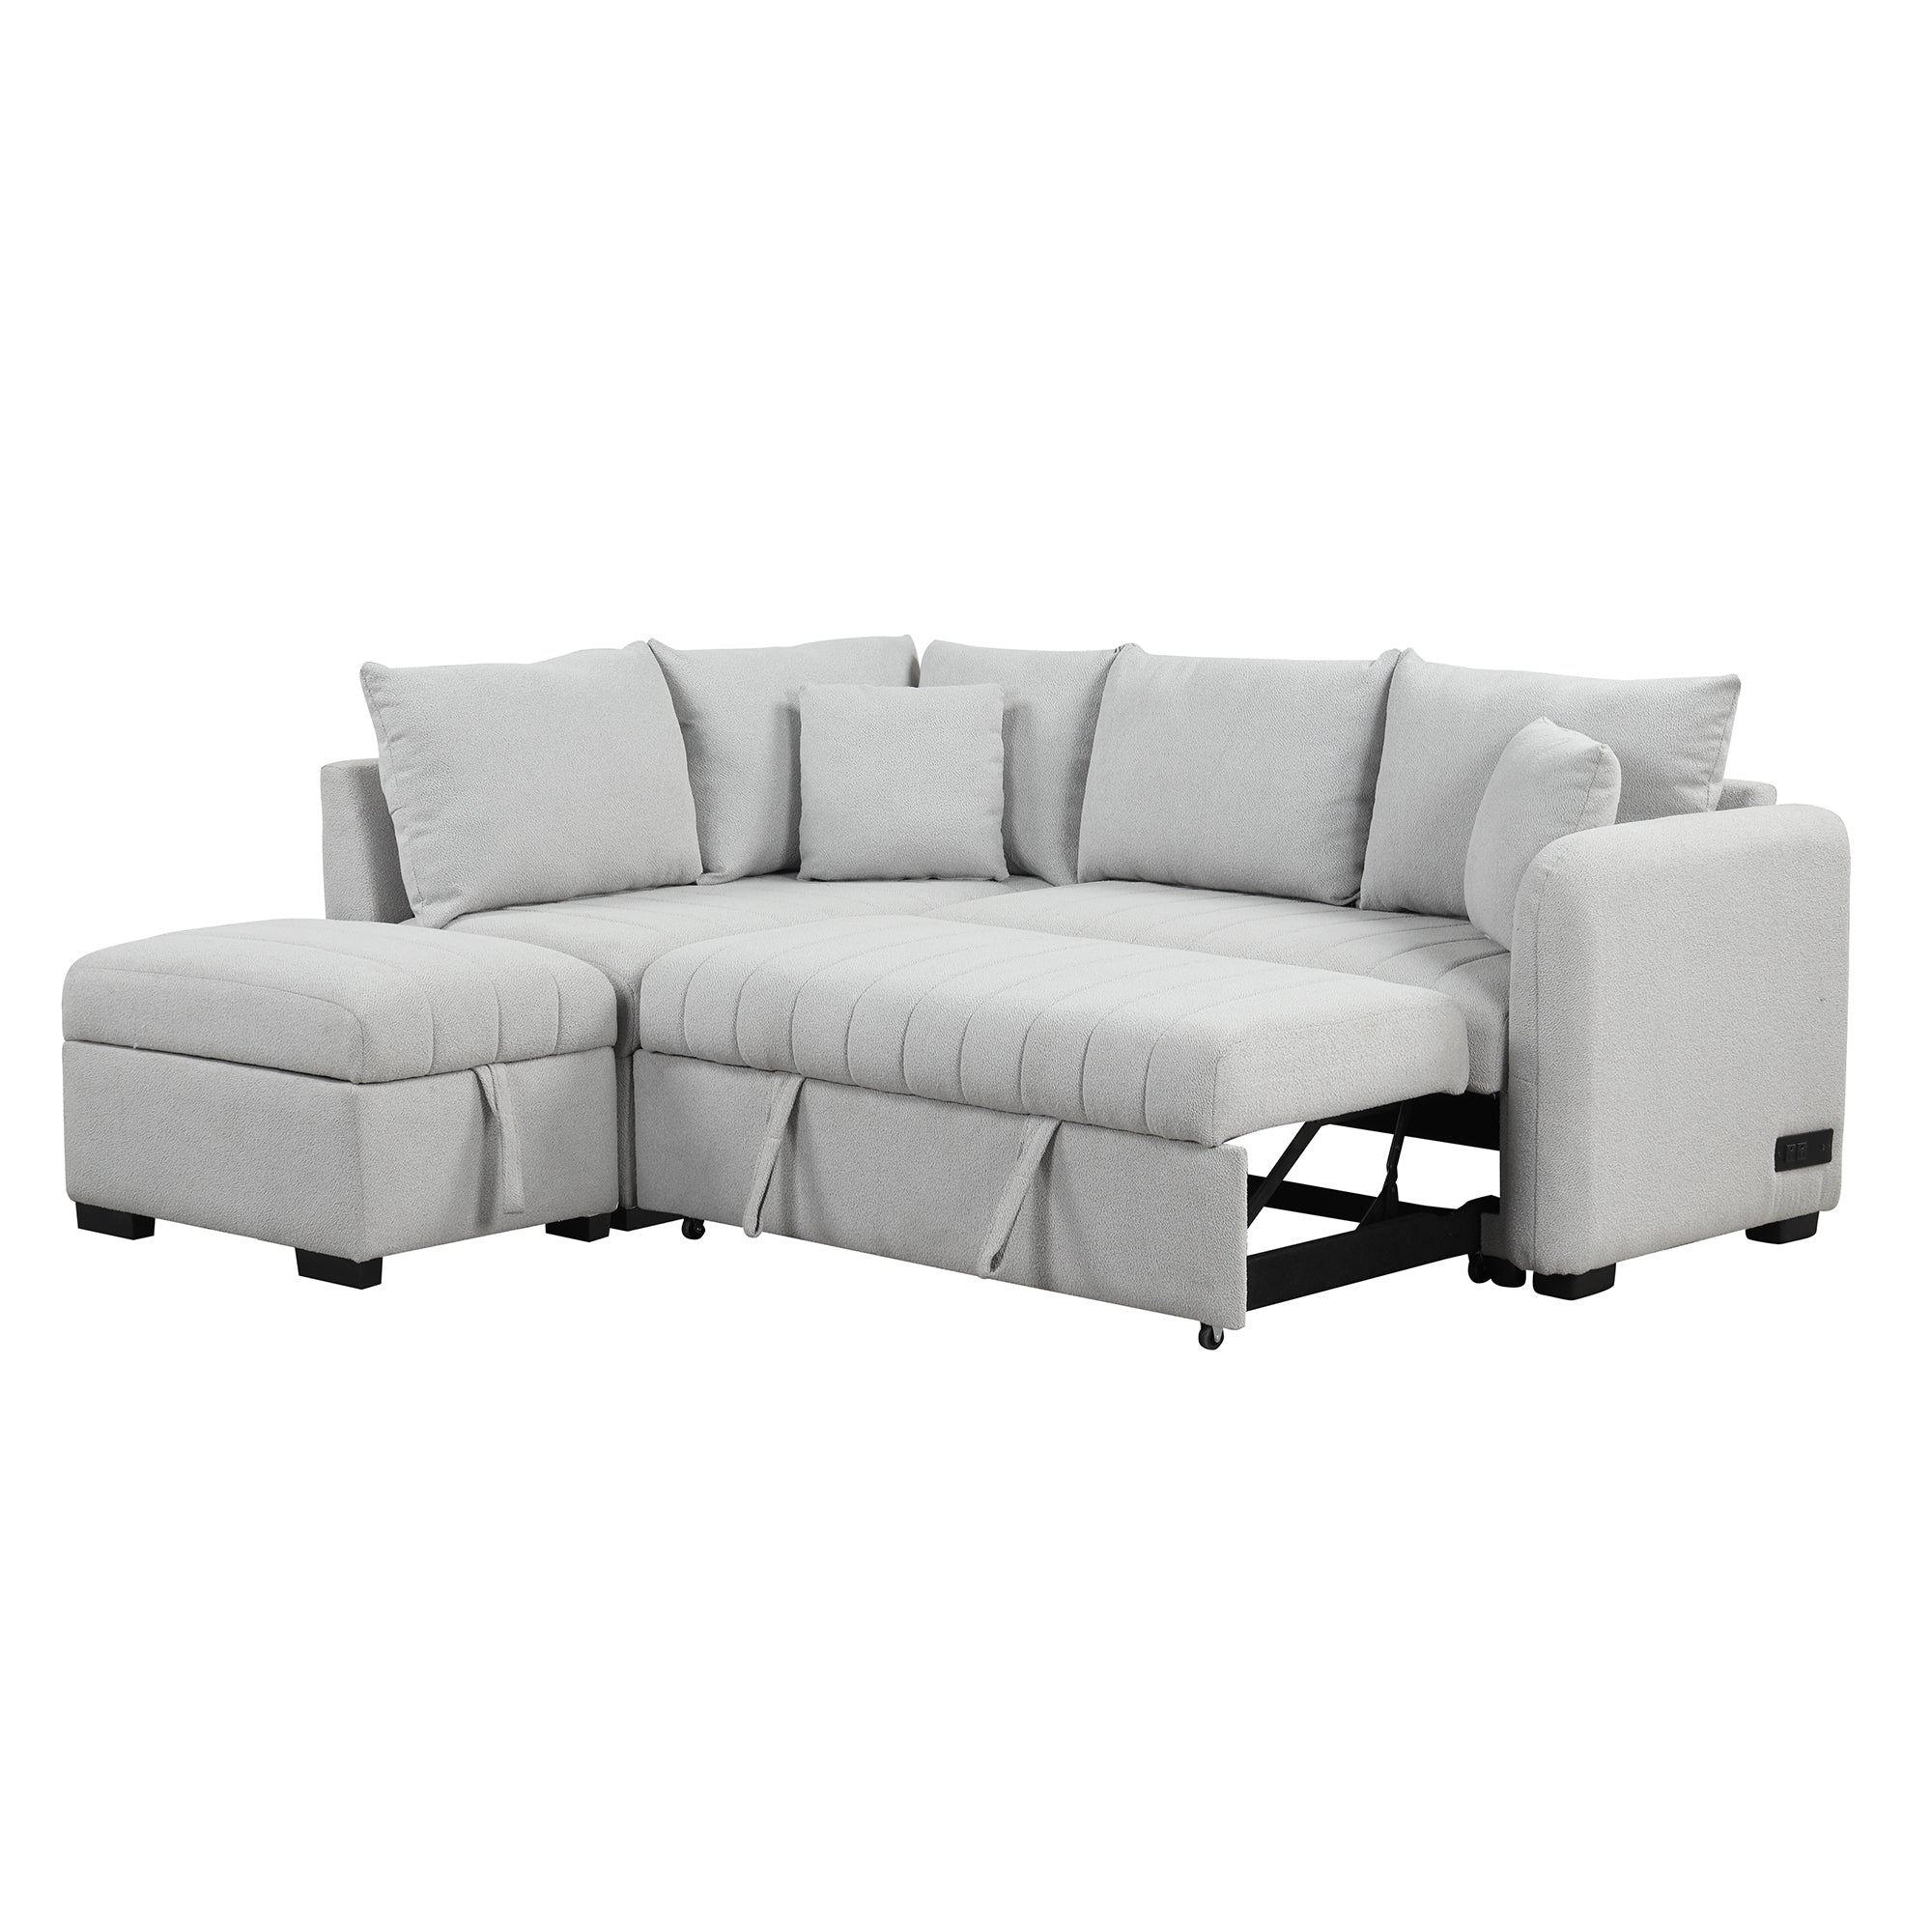 L-Shaped Sectional Pull Out Sofa Bed / Sleeper Sofa with Two USB Ports, Two Power Sockets and a Movable Storage Ottoman